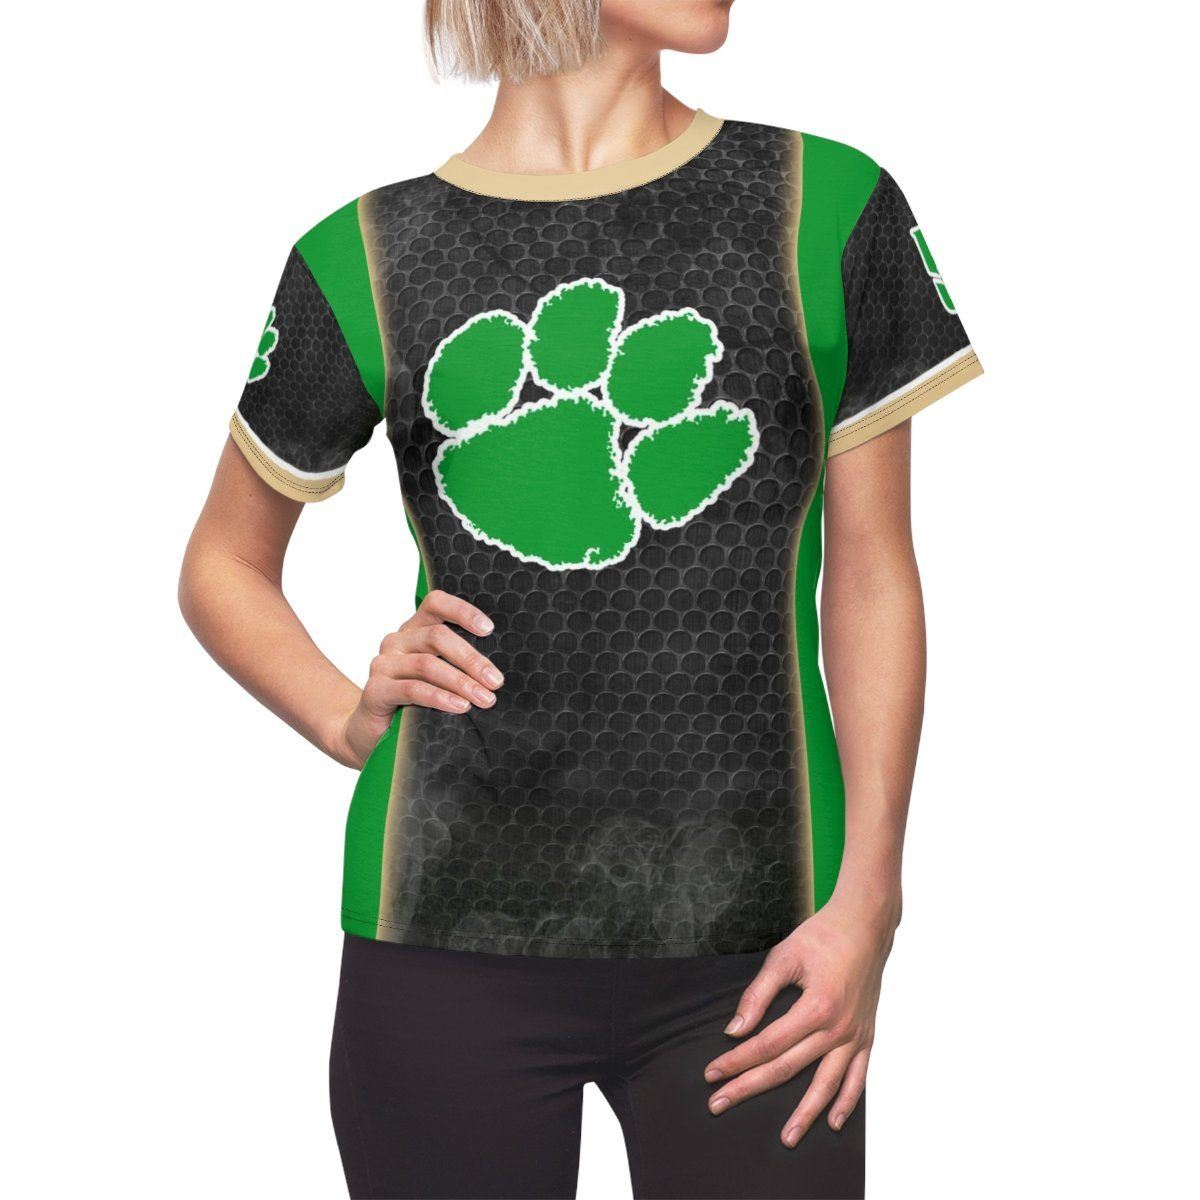 Smoke Screen - V.1 - Extreme Sportswear Women's Cut & Sew Template-Photoshop Template - Photo Solutions